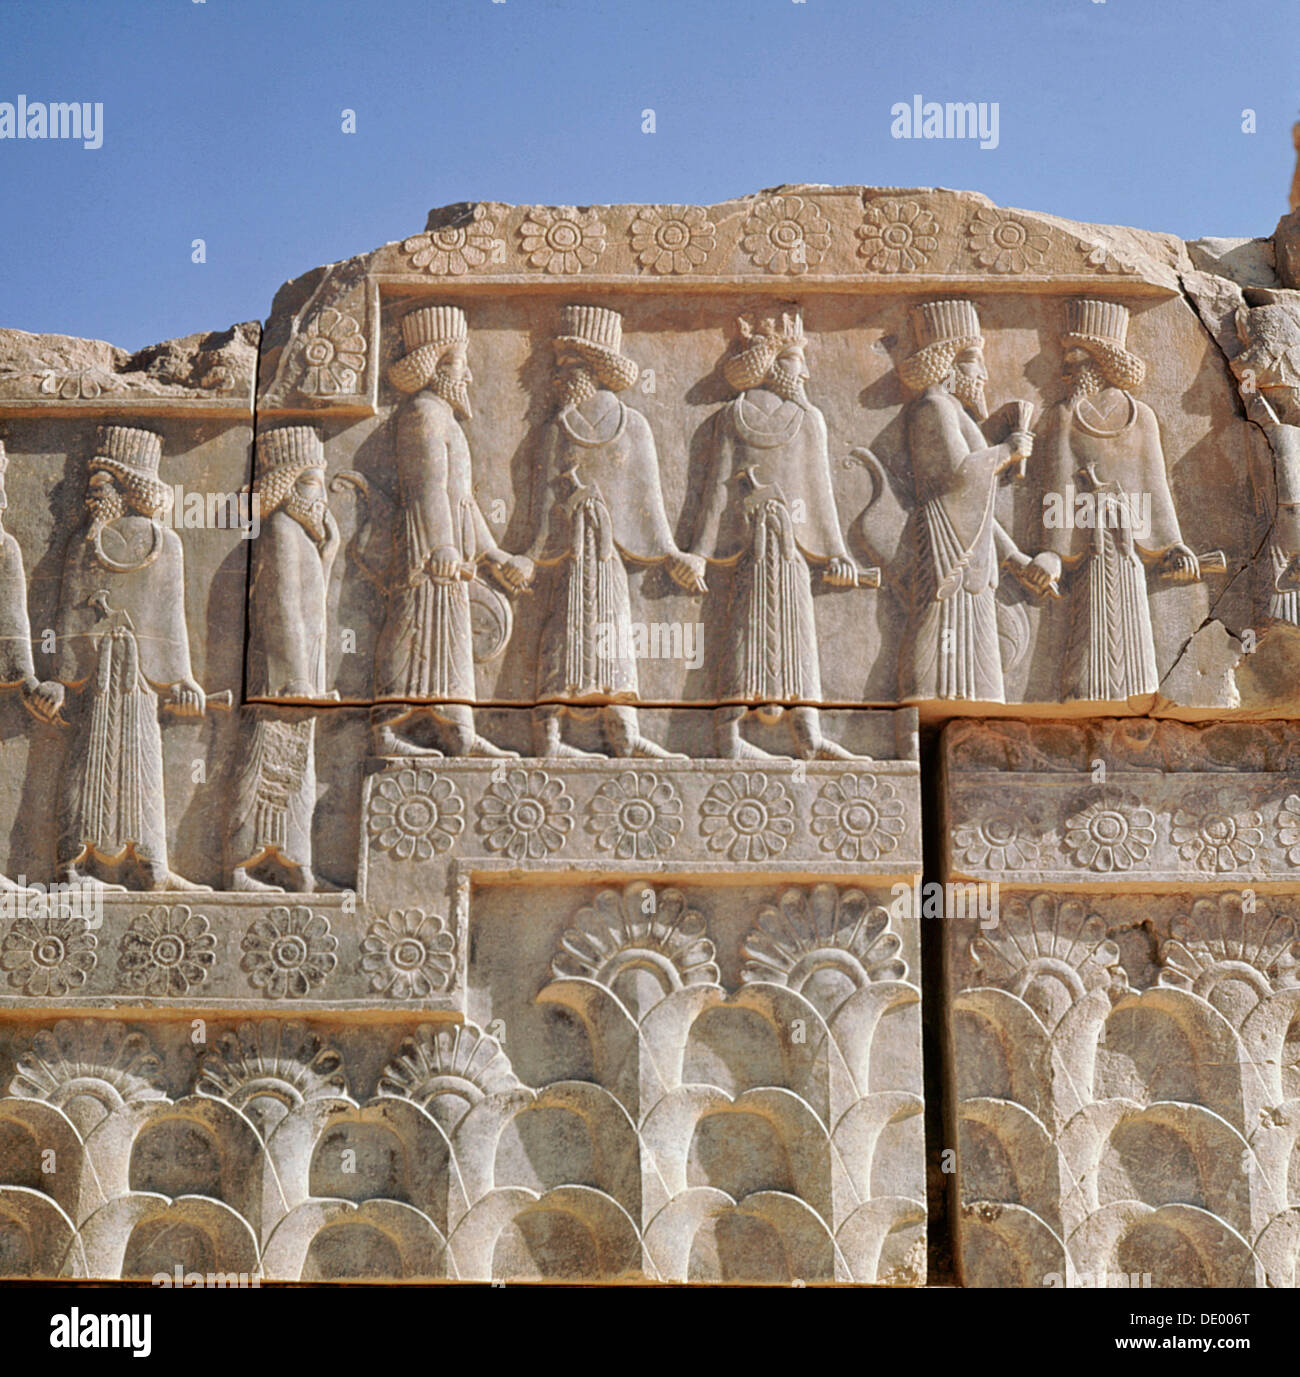 Relief carving, ruins of the ancient Persian city of Persepolis Stock ...